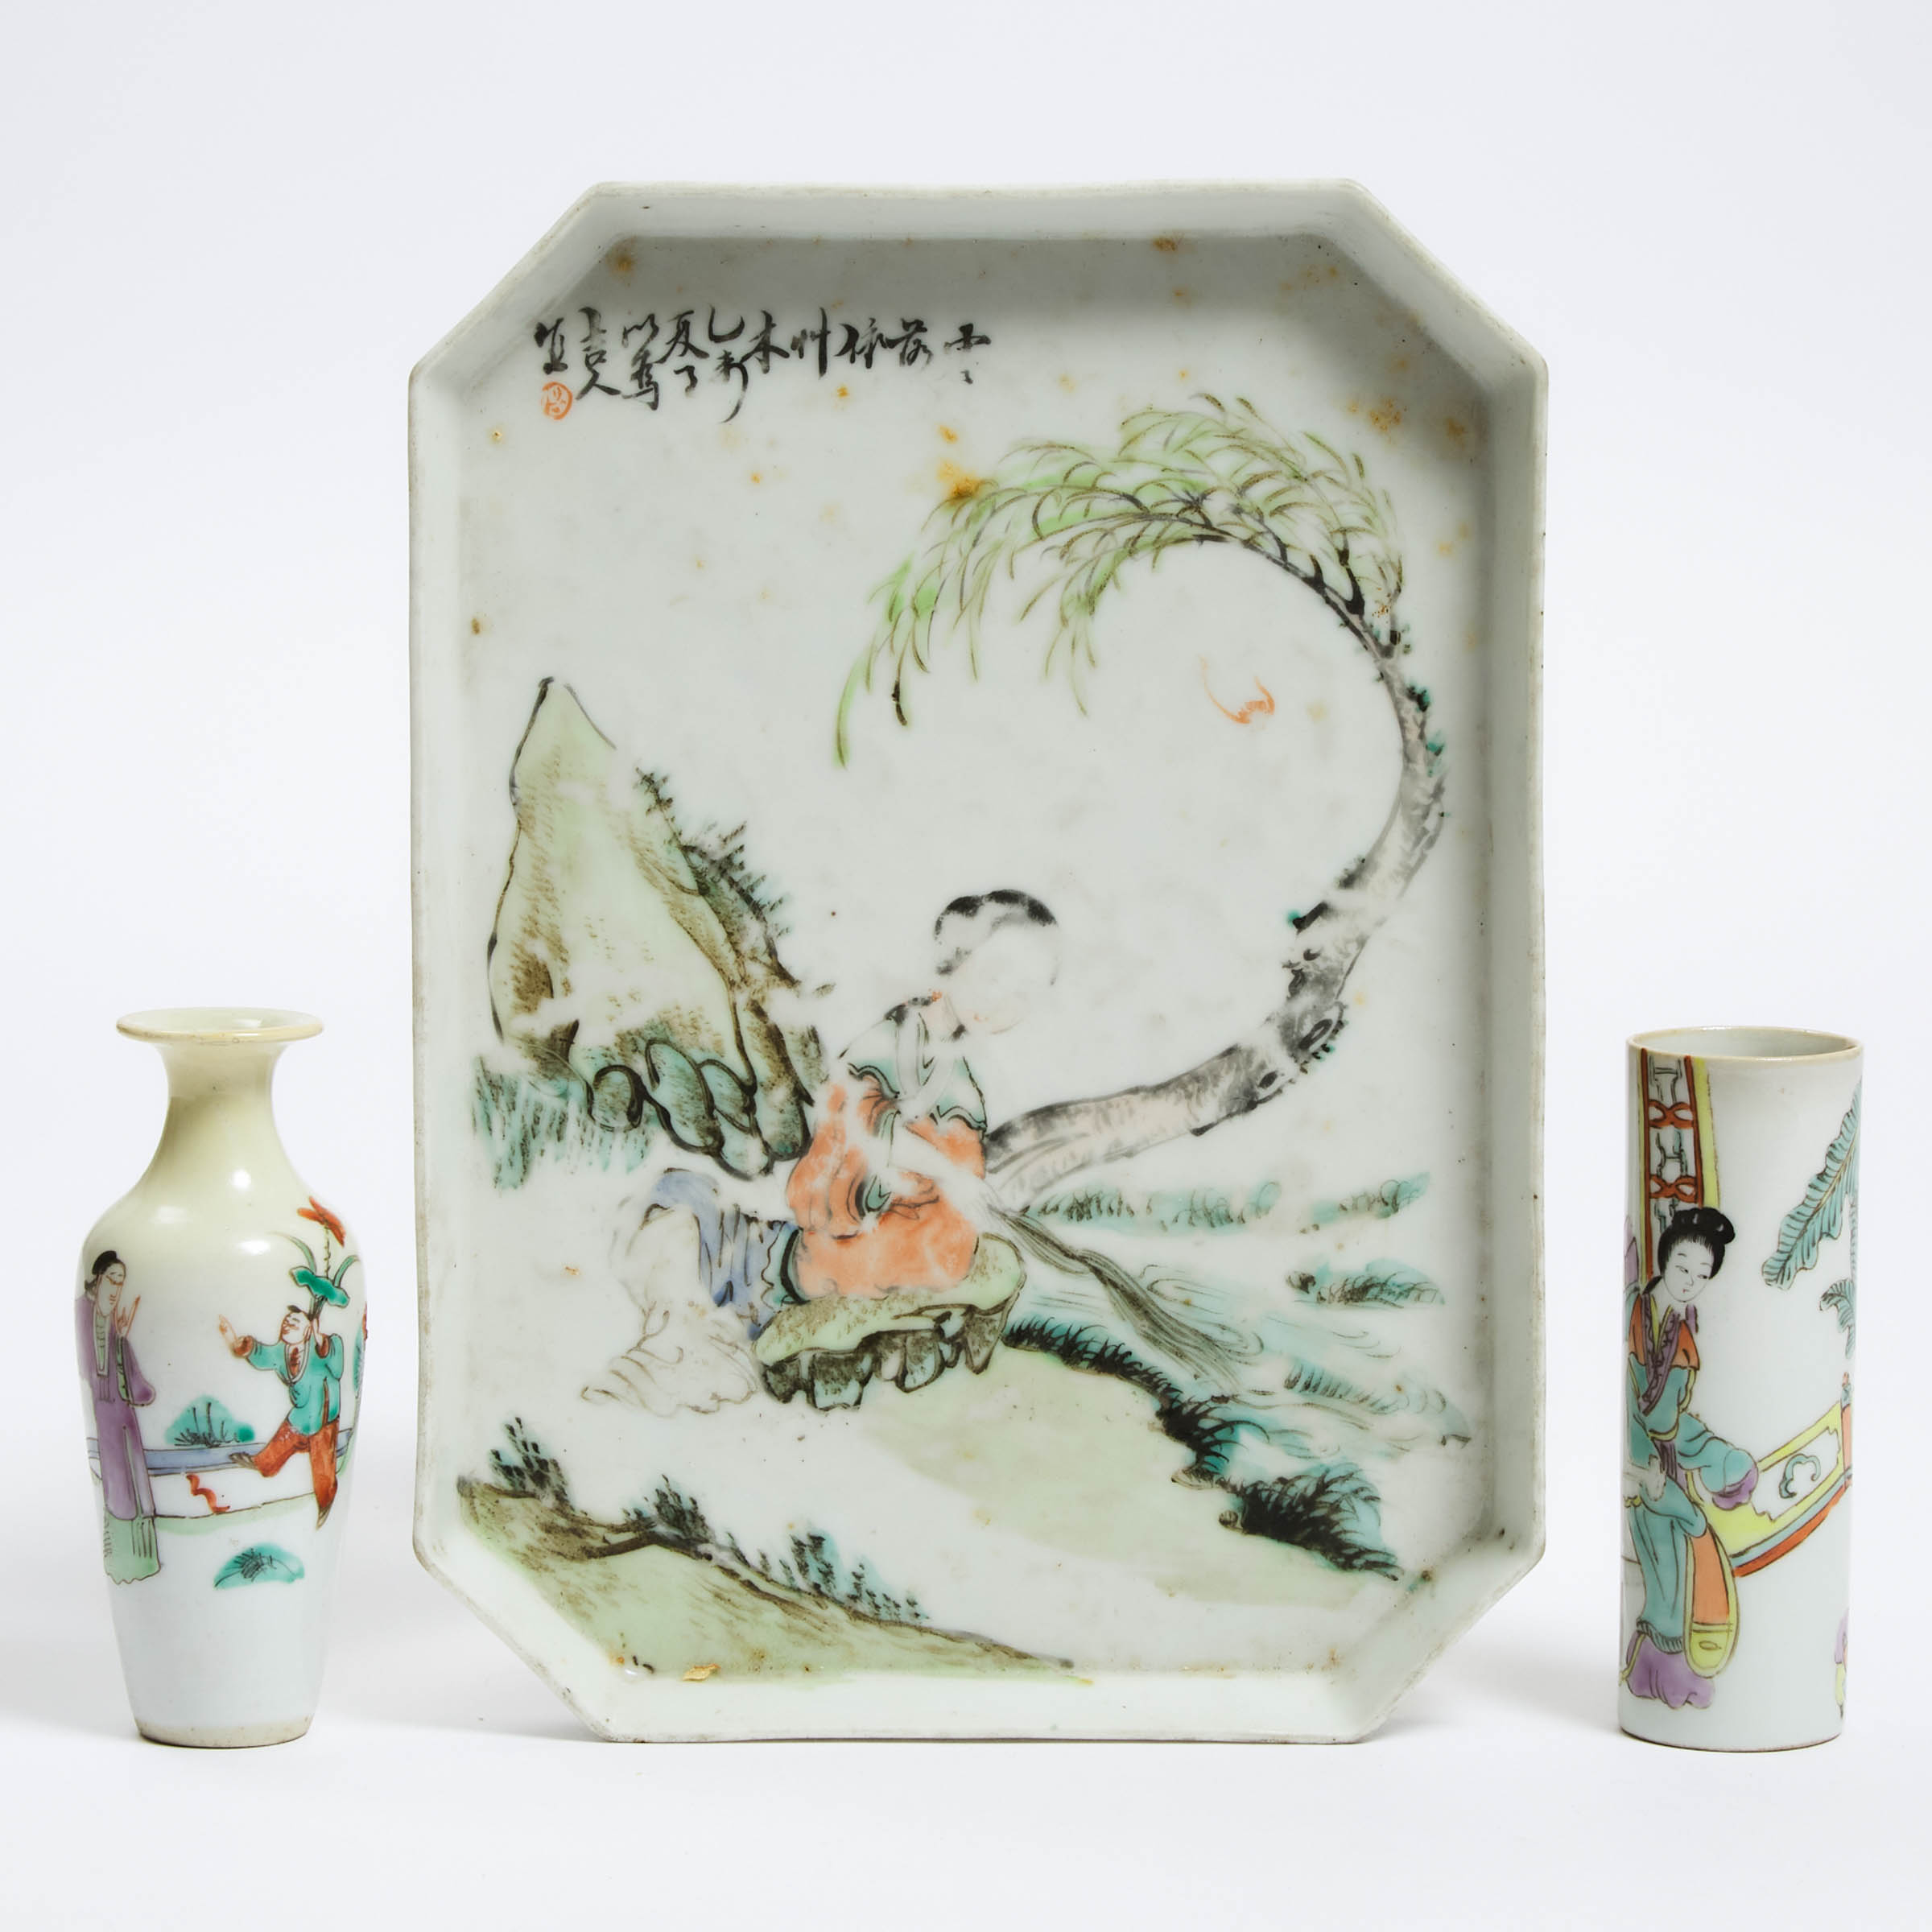 A Qianjiang-Enameled Platter, Together With Two Miniature Vases, Republican Period (1912-1949)